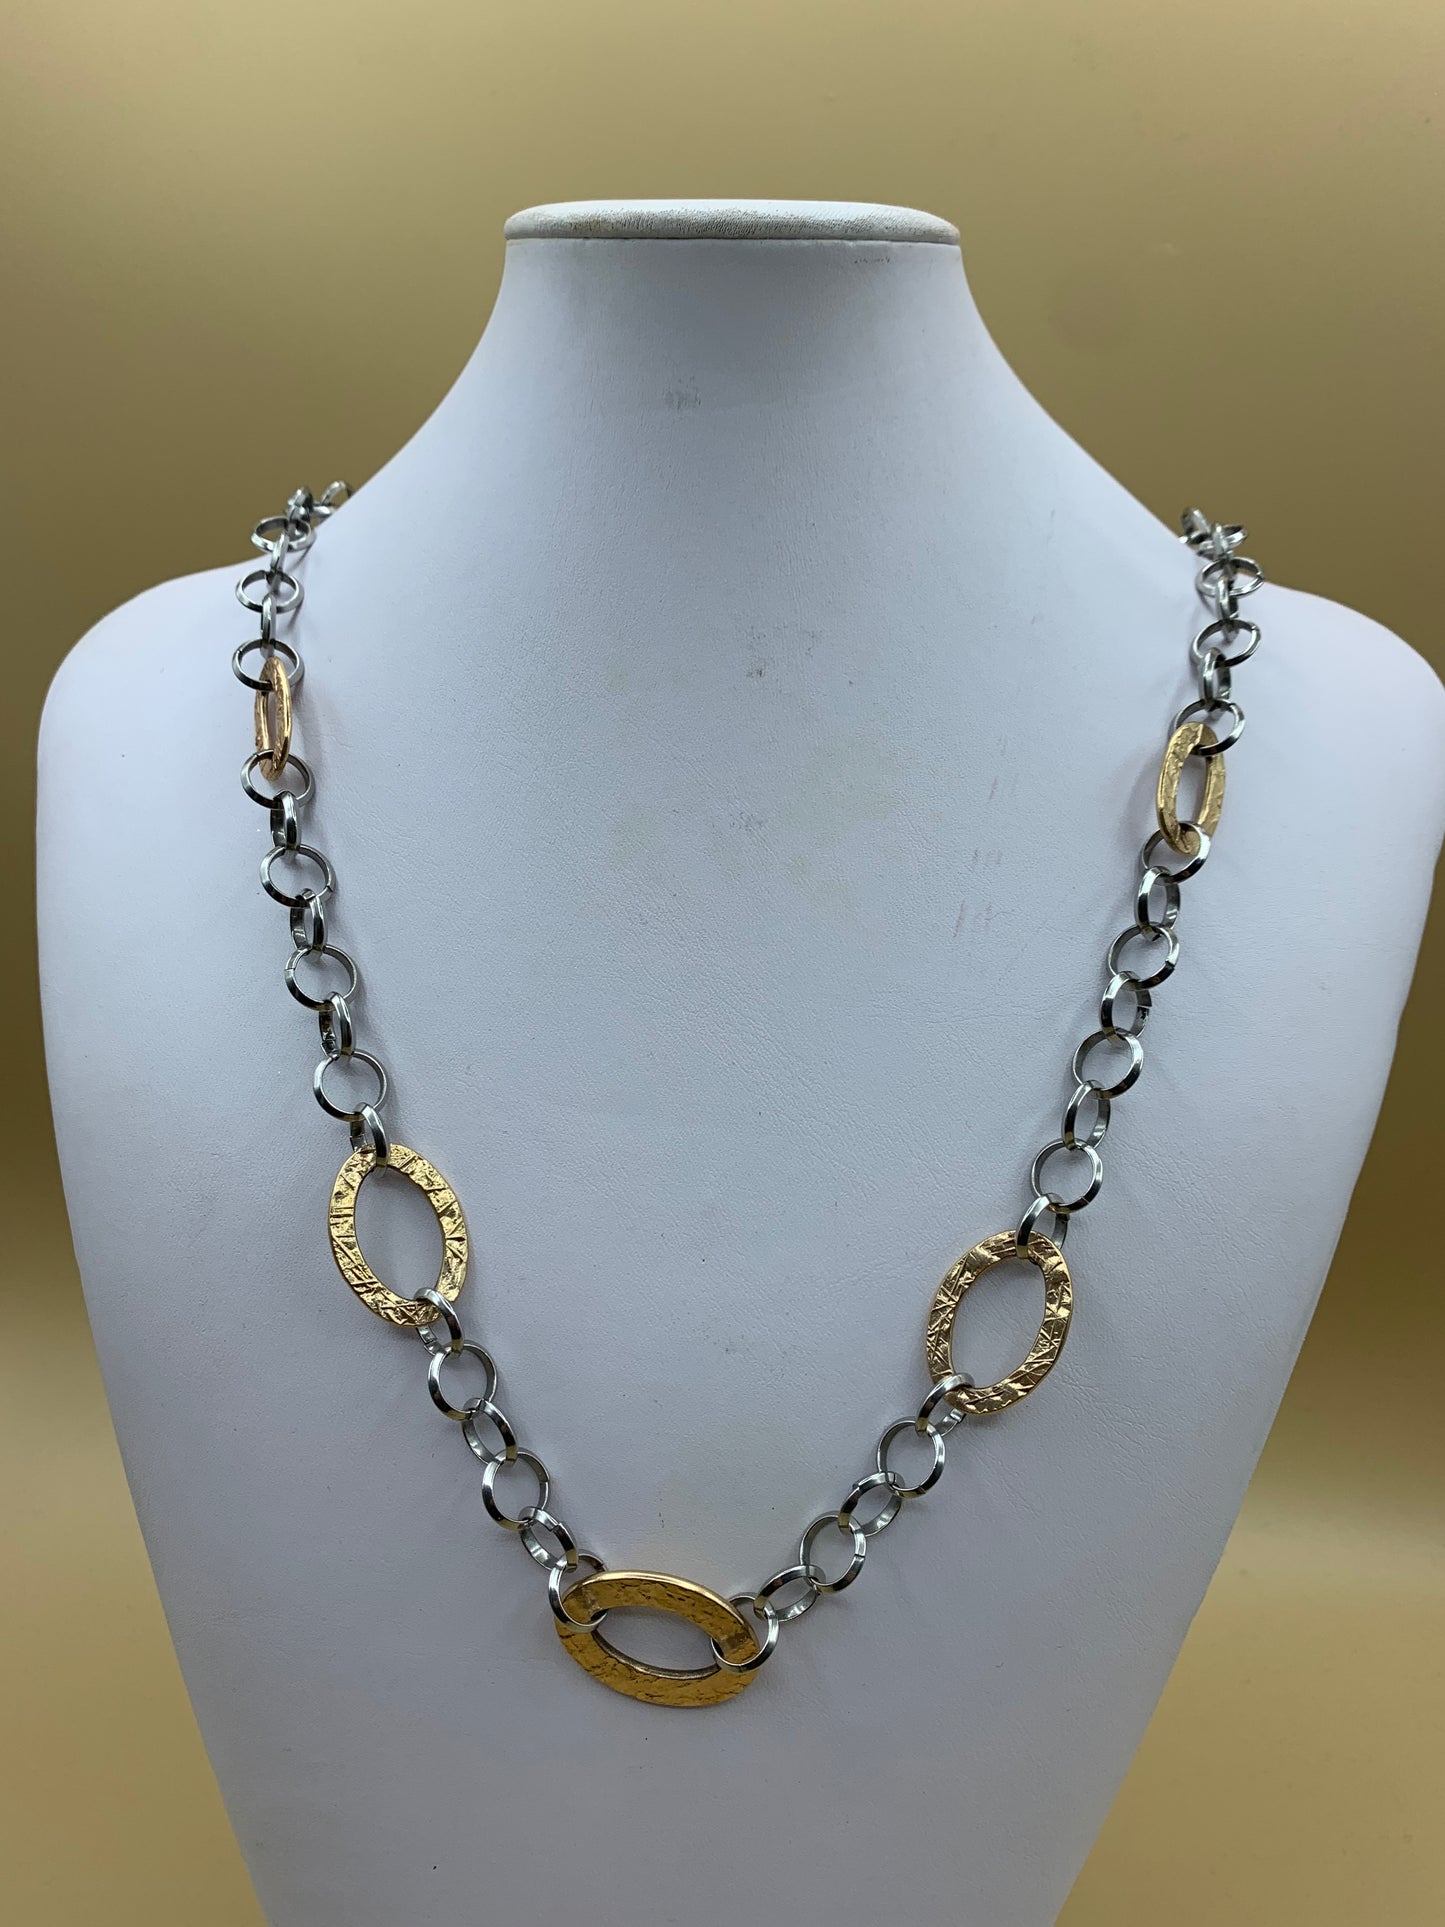 Zoppini long necklace